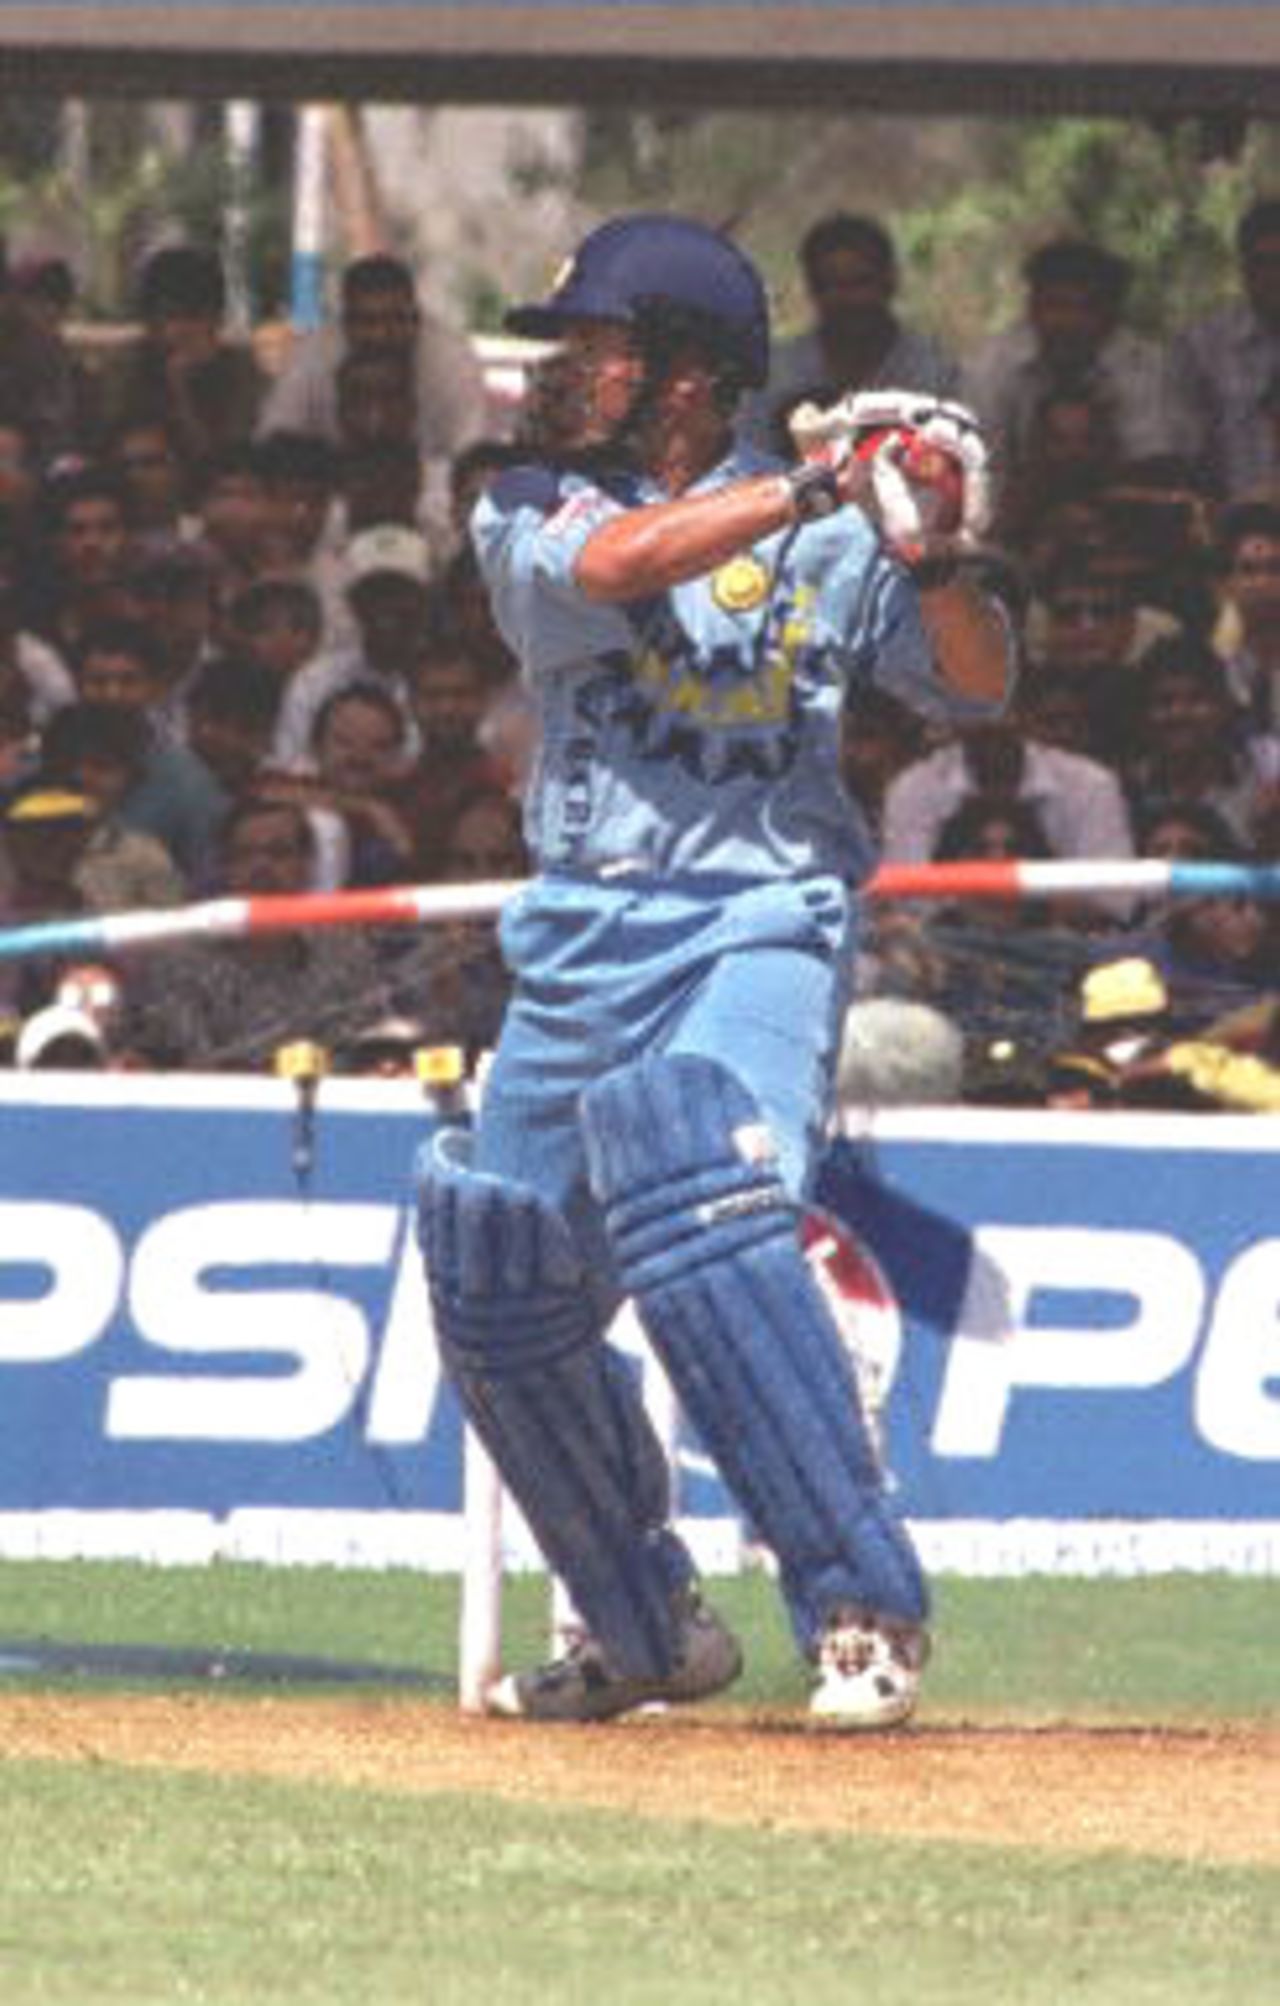 Indian master blaster batsmen Sachin Tendulkar squares Jacques Kallis to the fence as he chips-in 122 runs, 17 March 2000 that brought India victory over South Africa at the IPCL stadium in Baroda. Tendulkar grabbed his 25th one-day century as India won the fourth of their five-math series against South Africa to take an unbeatable 3-1 lead